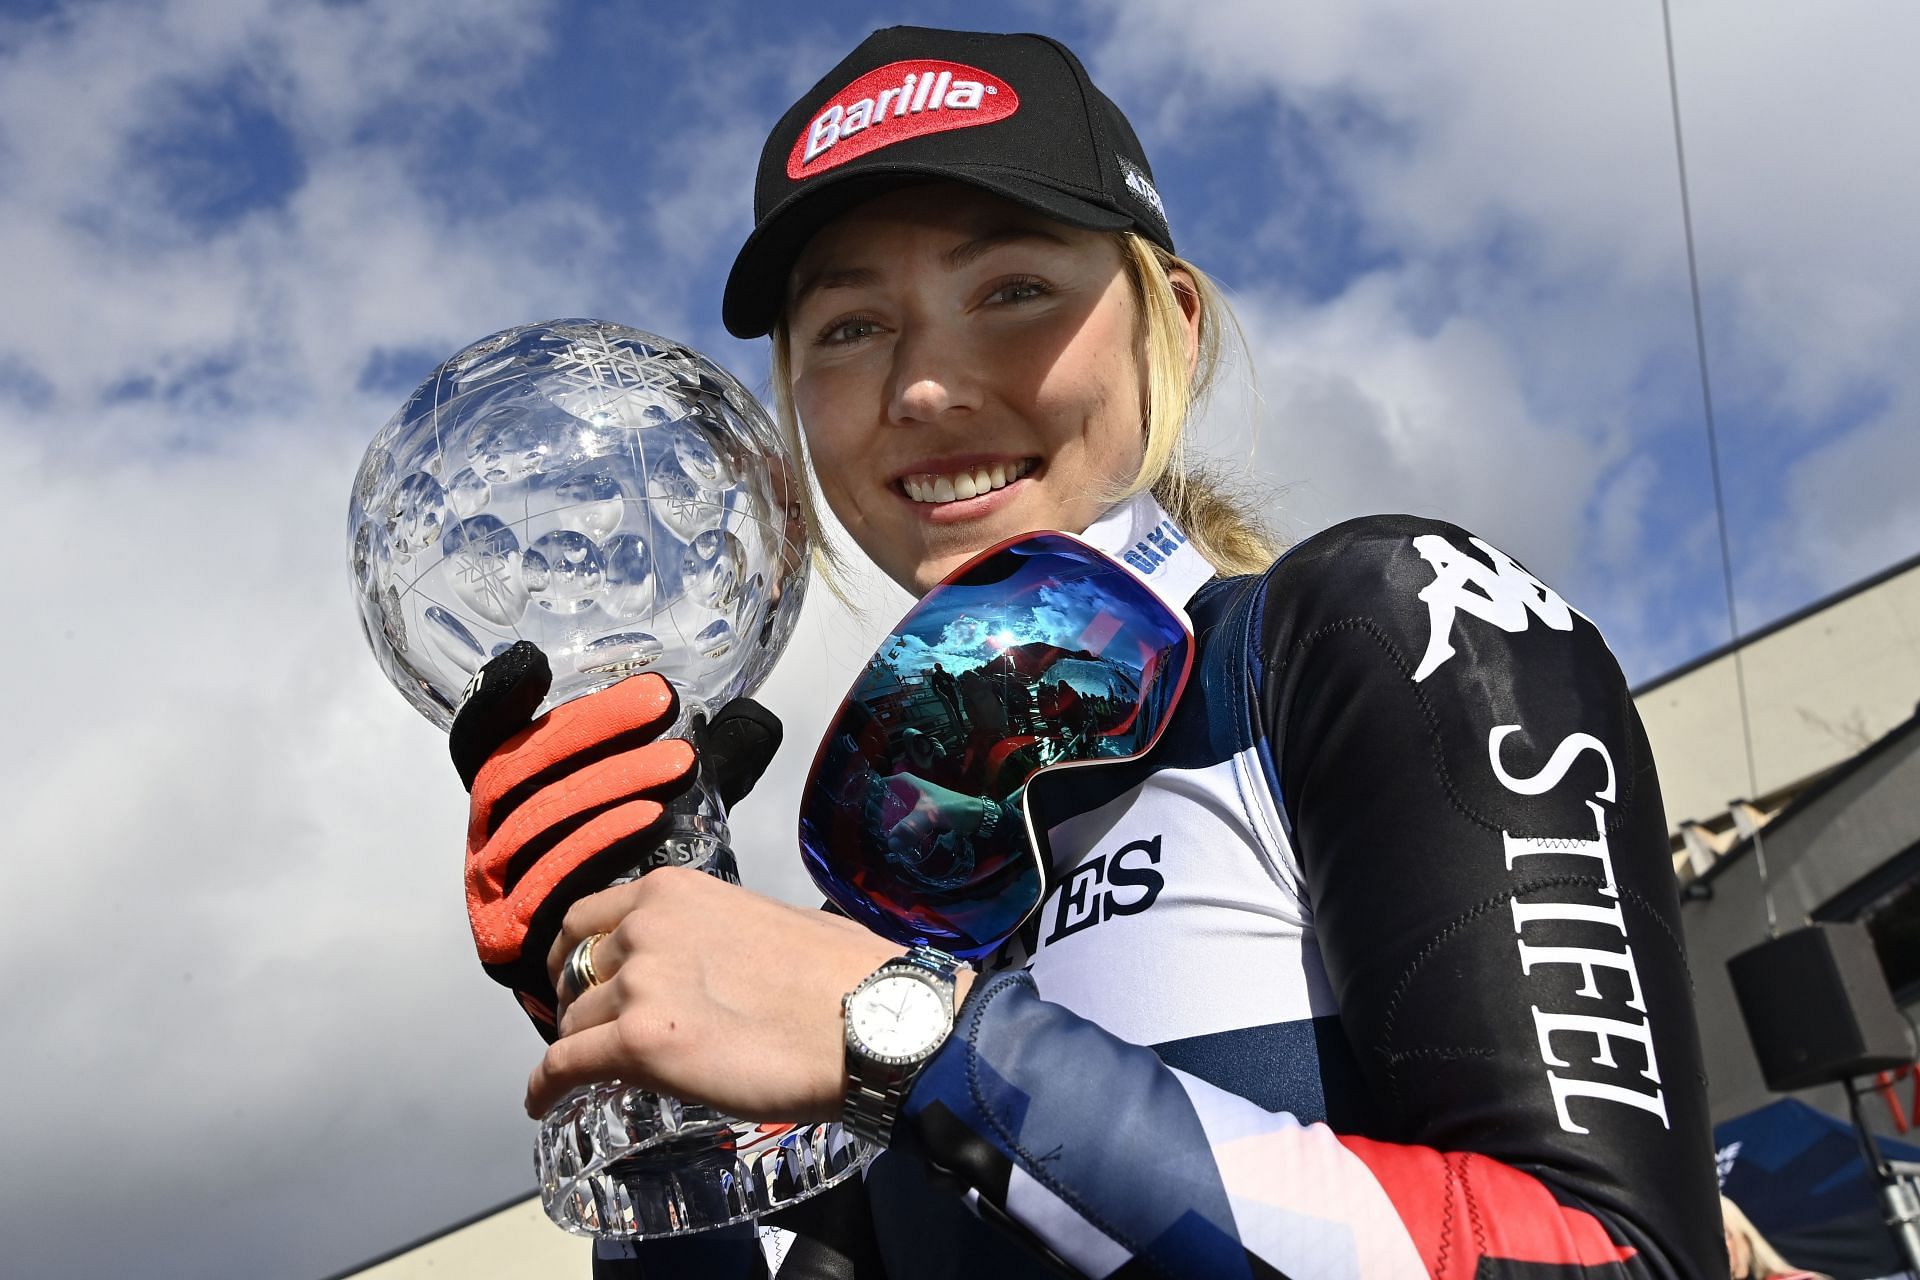 Mikaela Shiffrin wins the globe in the overall standings during the Audi FIS Alpine Ski World Cup Finals Women&#039;s Slalom in Saalbach Austria.